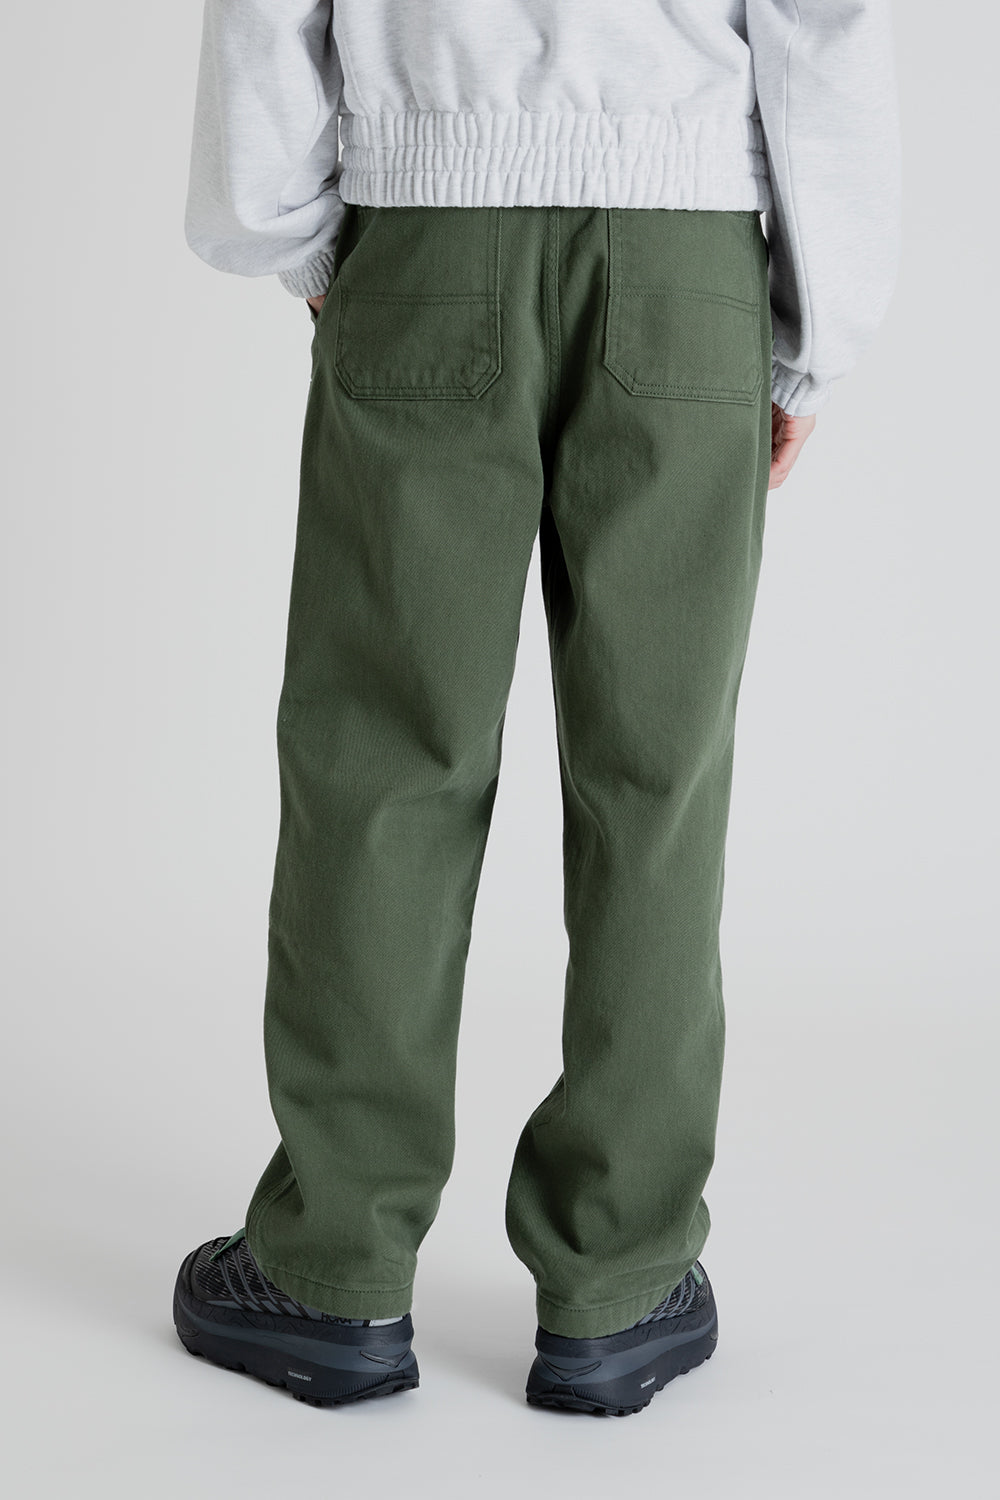 Frizmworks 7S Cotton Double Knee Pants in Olive